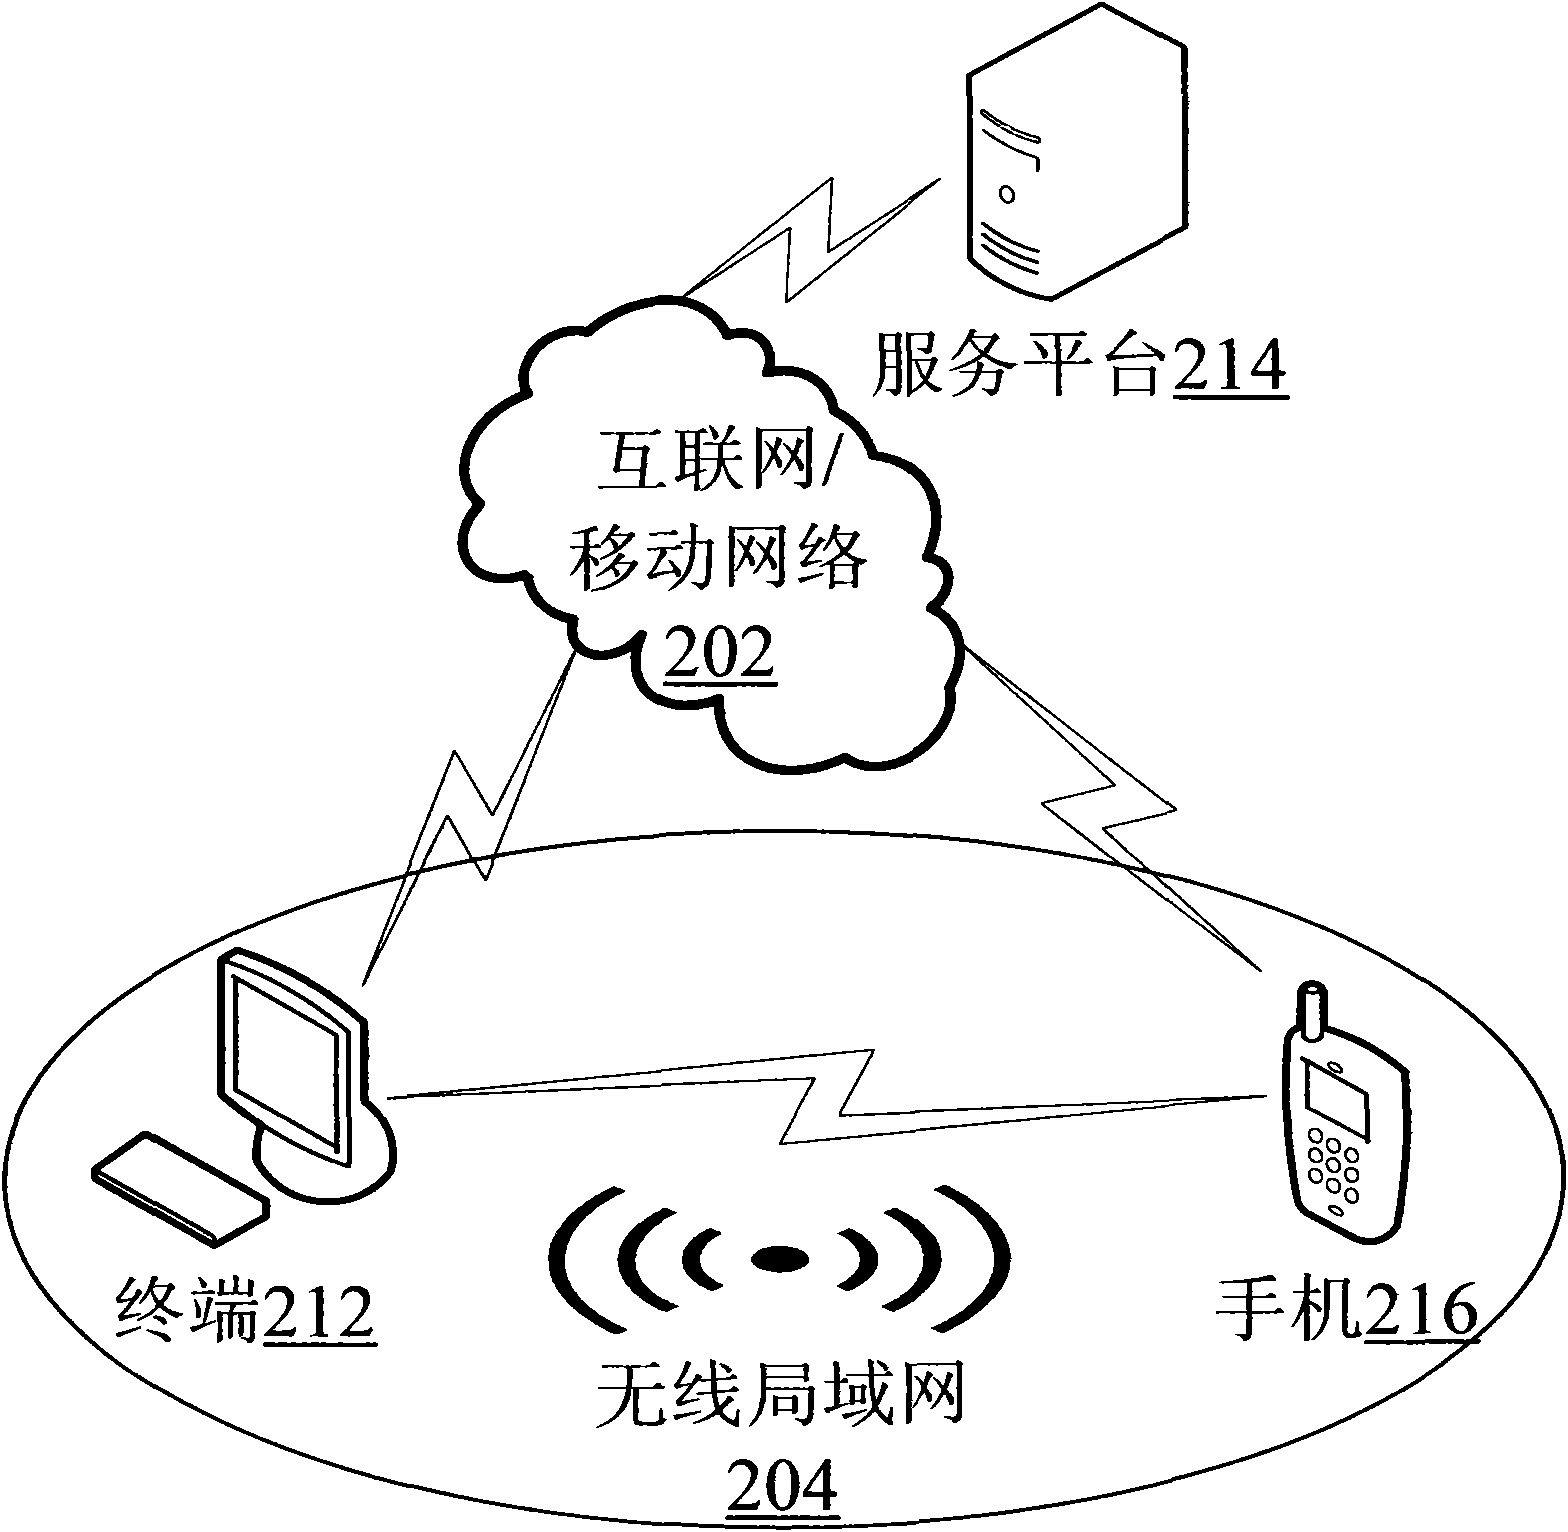 Community-oriented electronic certificate system of mobile phone